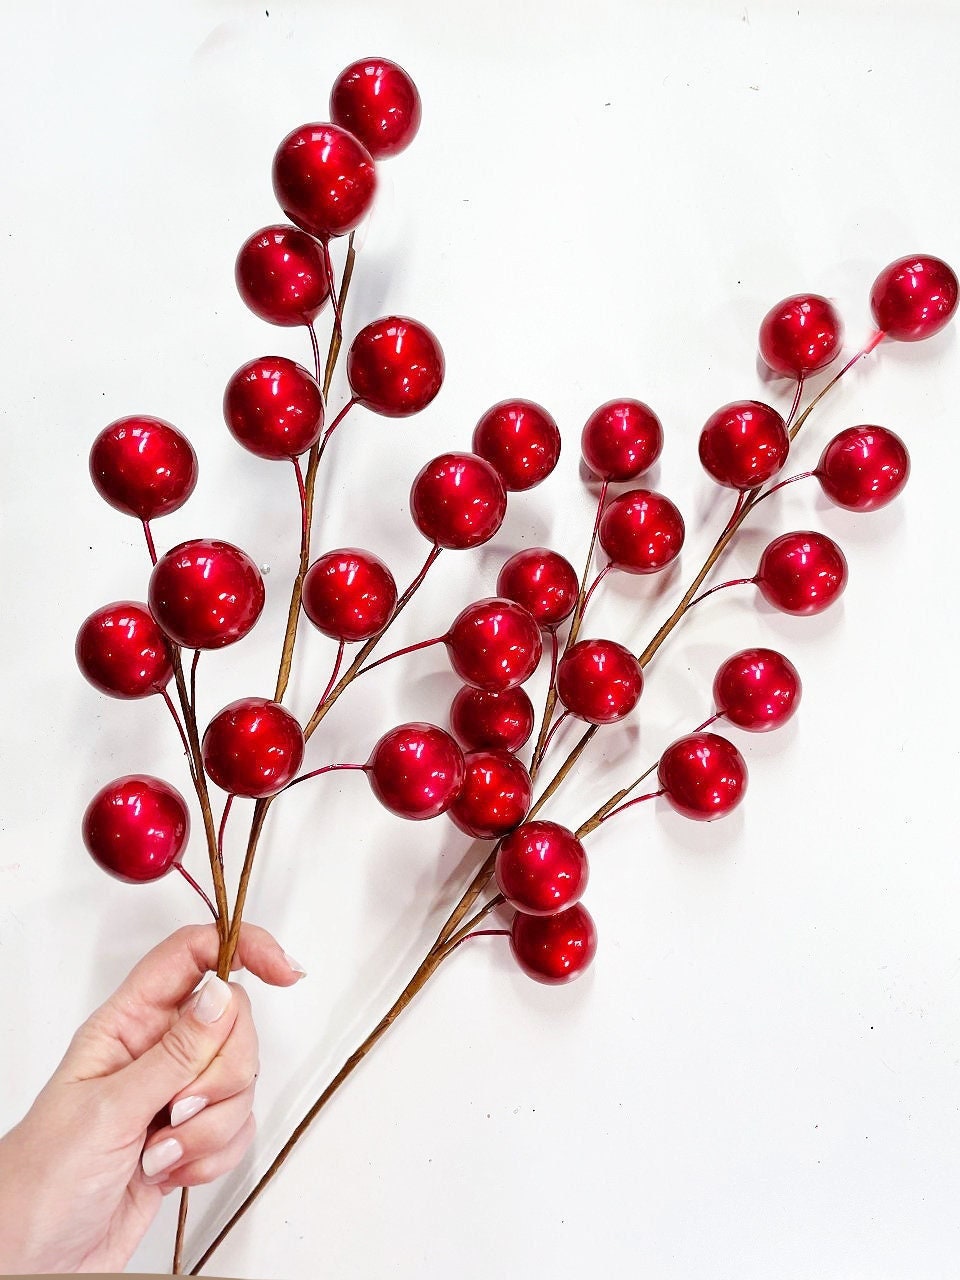 Branch Red Berries Christmas Decor Stock Photo 353403812